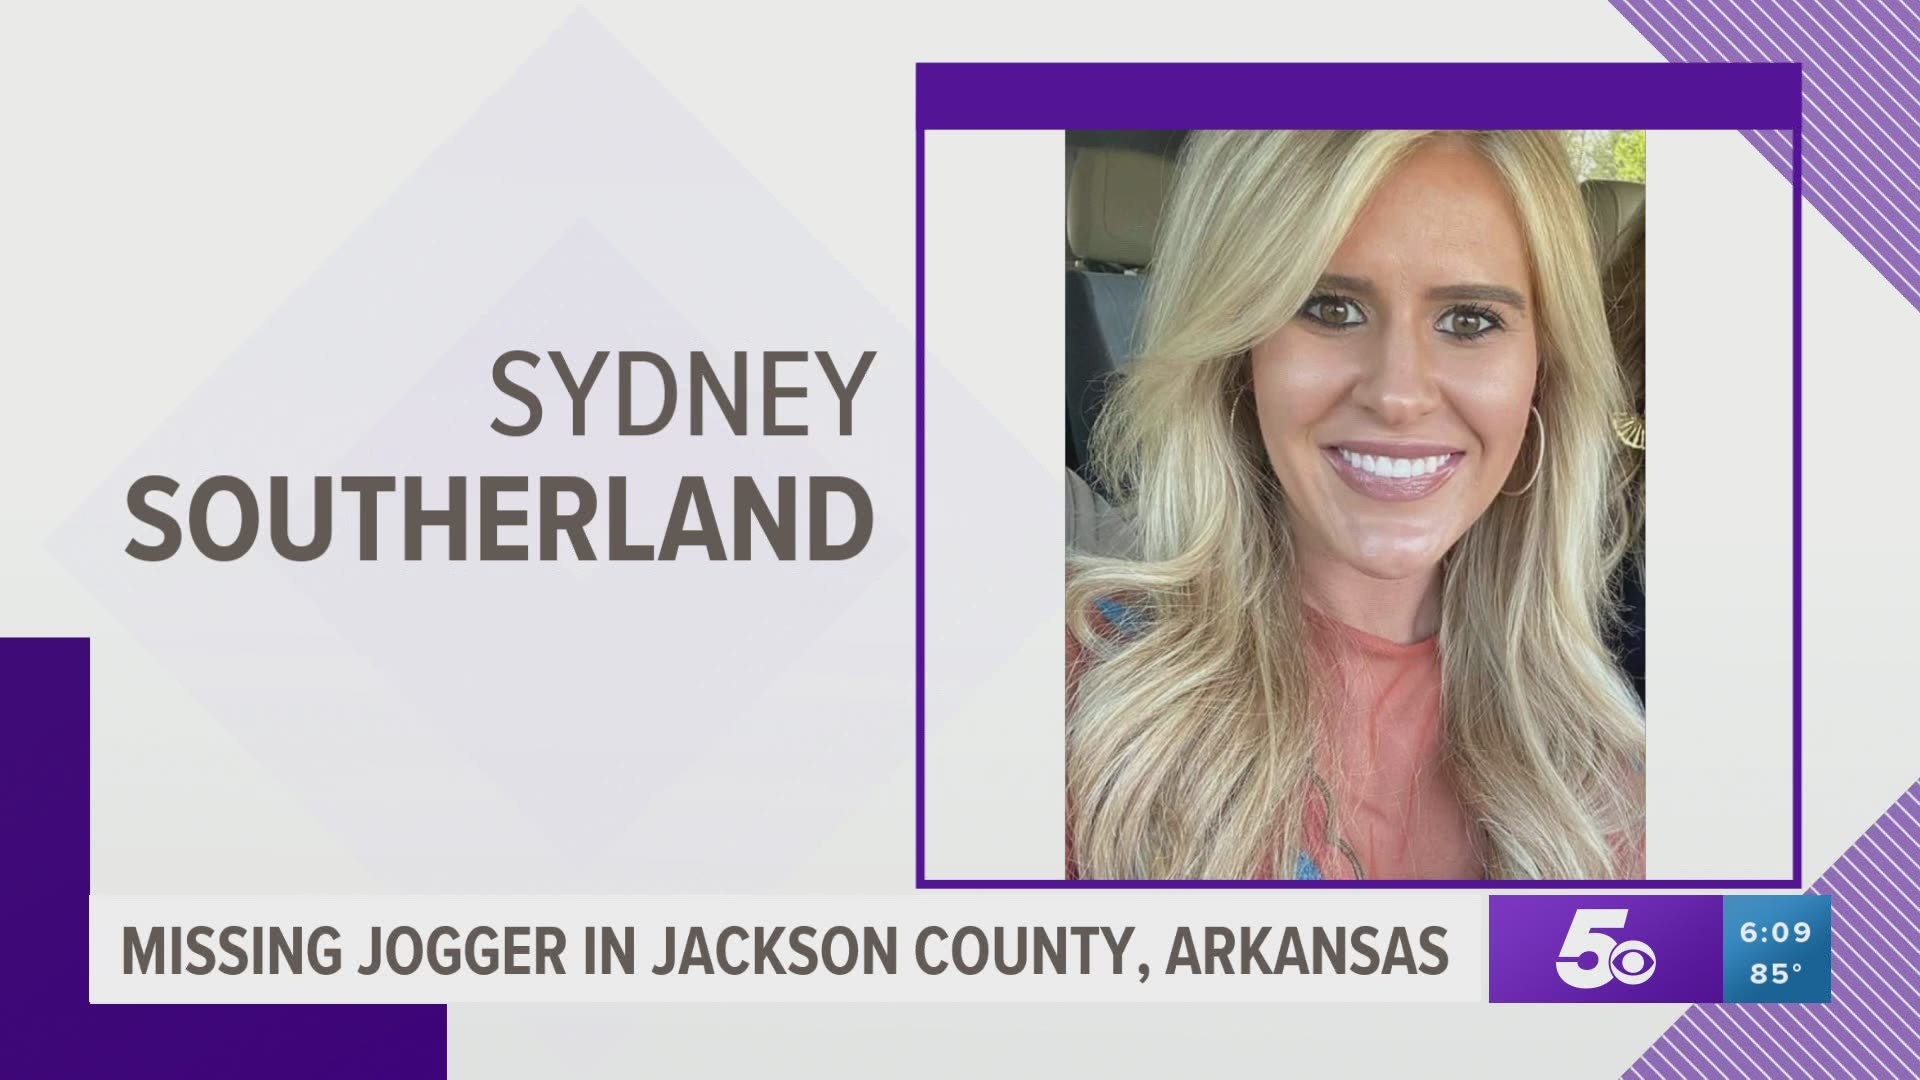 Sydney Southerland was last seen after leaving for a jog at around 3 p.m. in the area of State Hwy 18 between Newport and Grubbs. https://bit.ly/34ivzhi